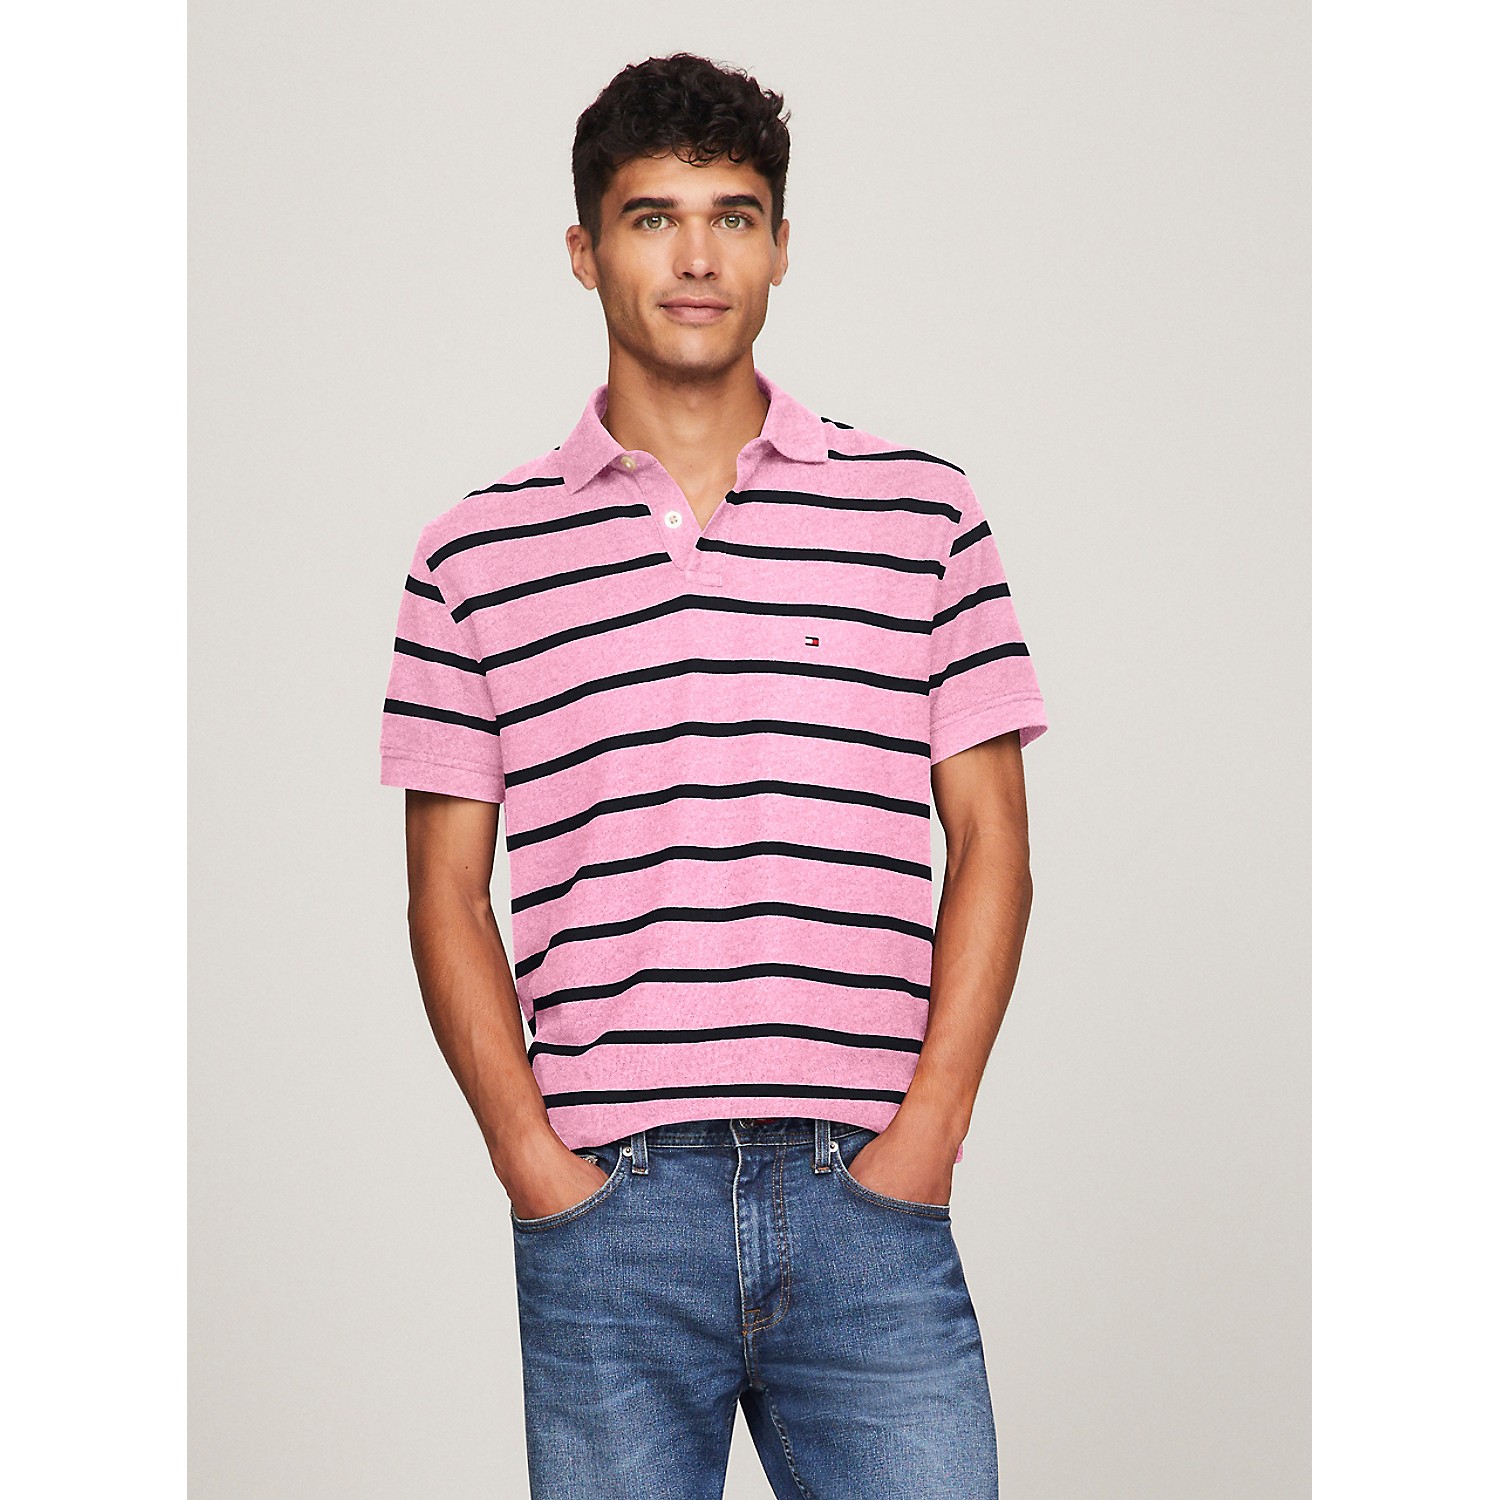 TOMMY HILFIGER Regular Fit Stripe Wicking Polo